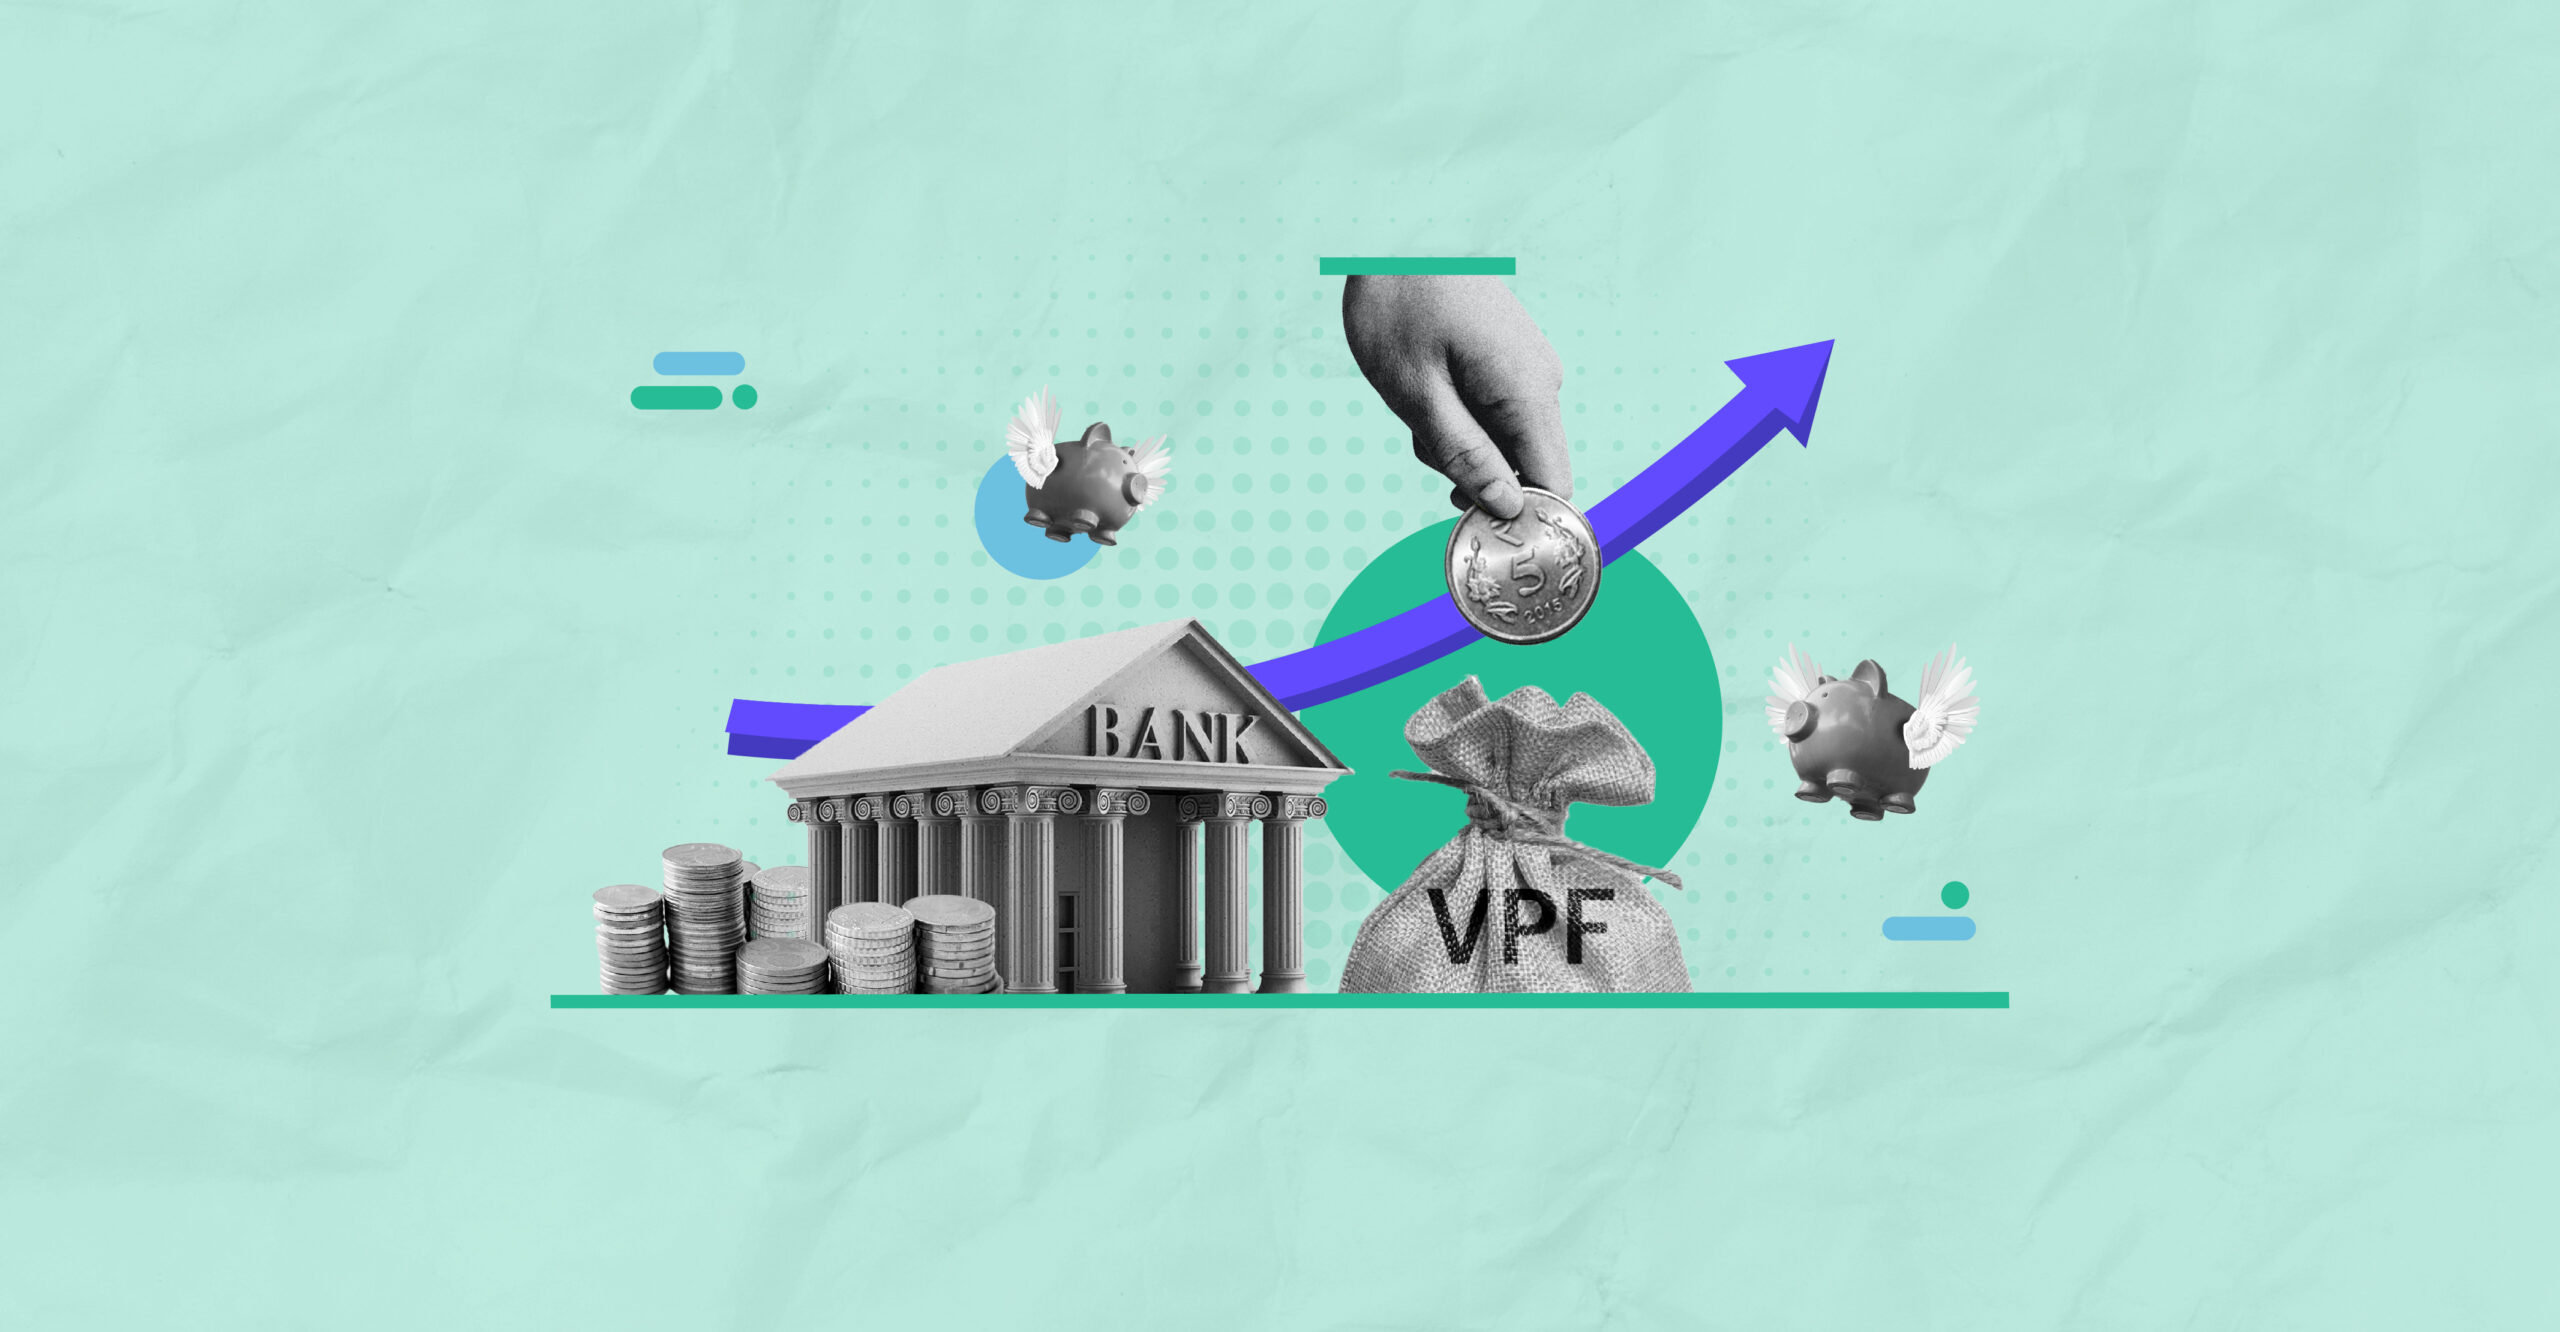 vpf-interest-rate-eligibility-withdrawal-rules-and-tax-benefits